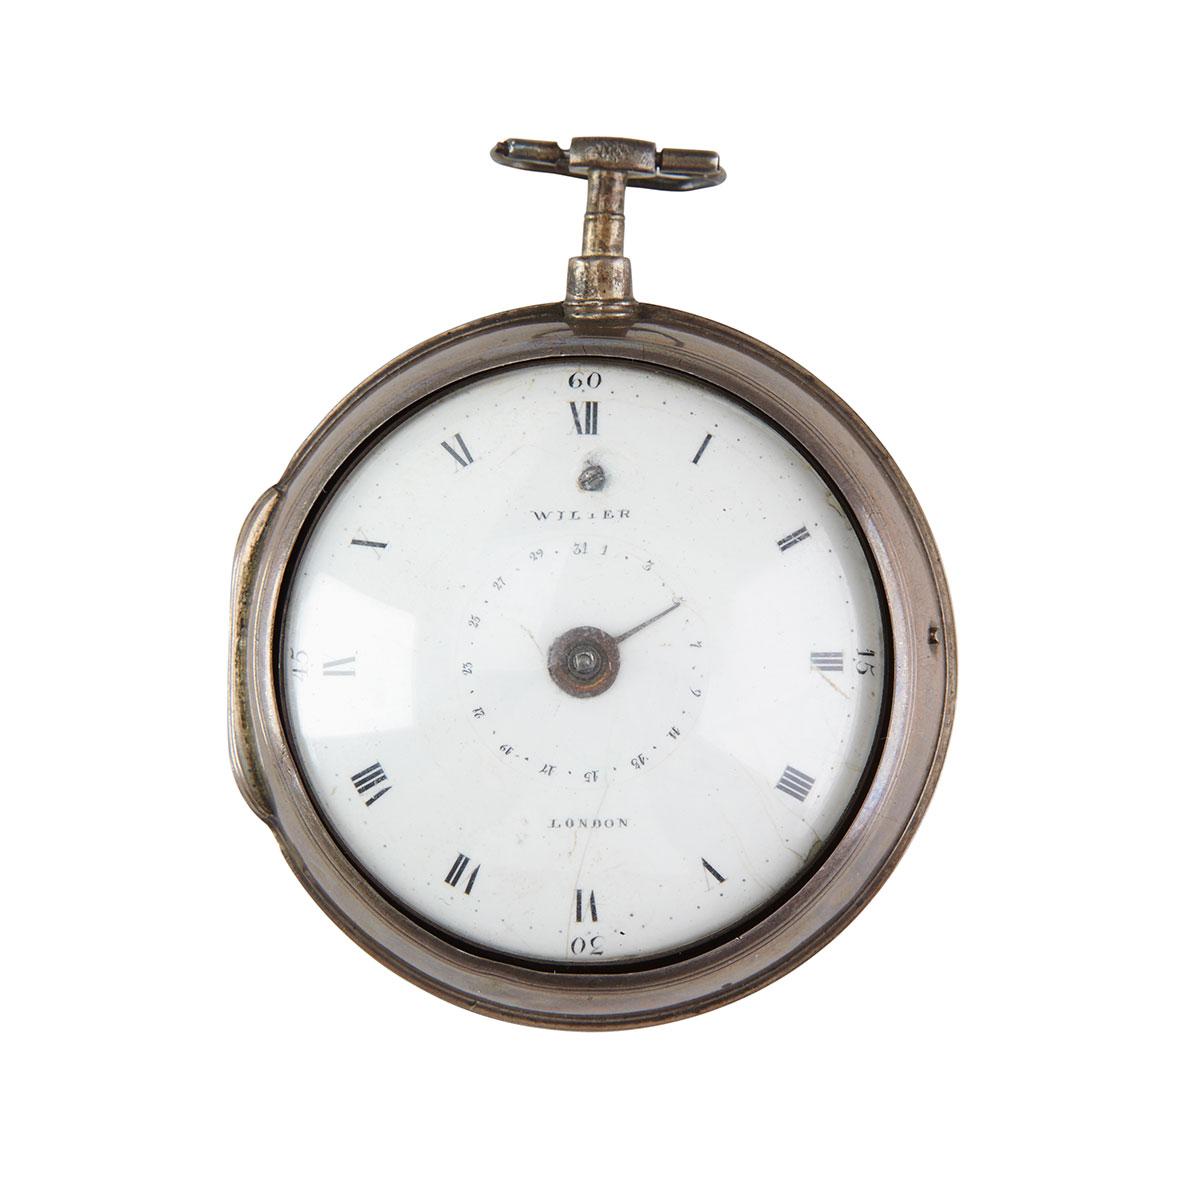 John Wilter Of London Pocket Watch With Date